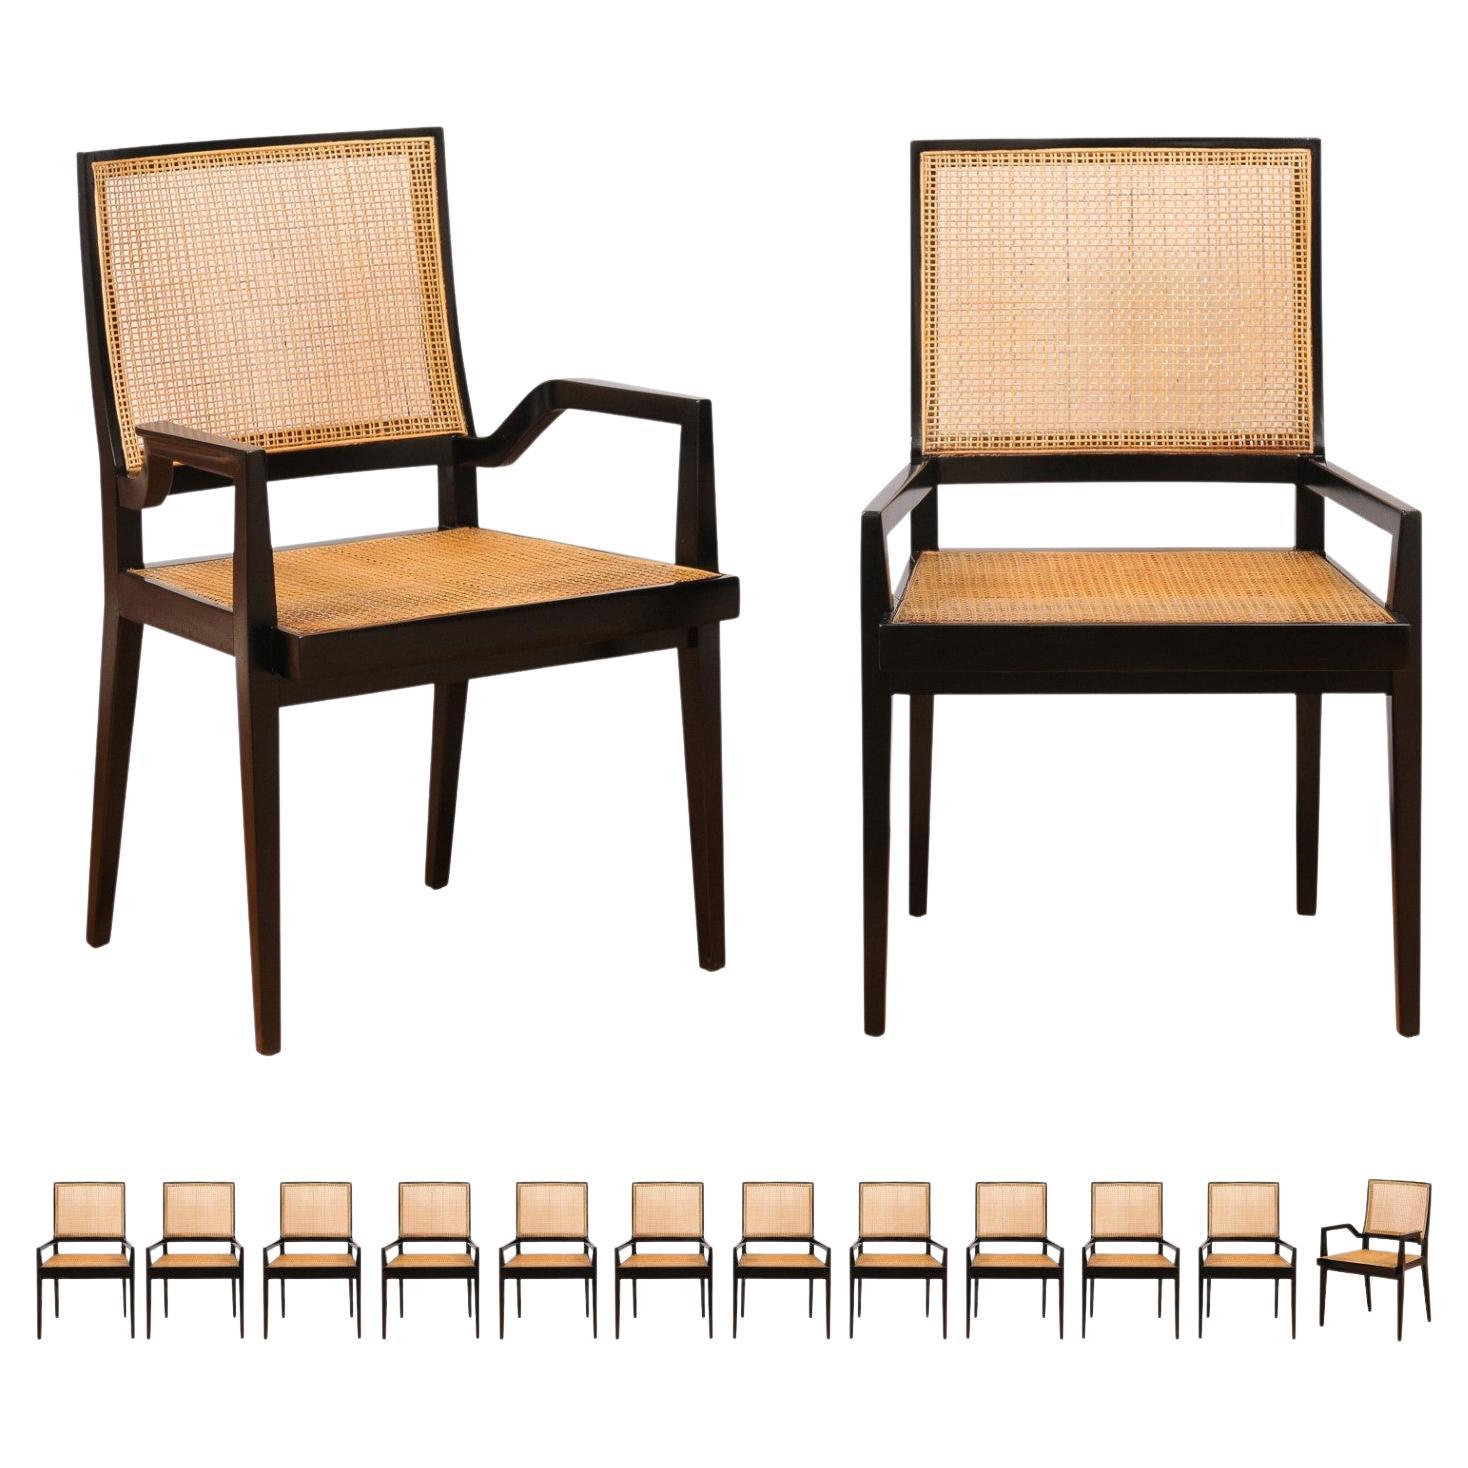 Spectacular Restored Set of 14 Sleek Double Cane Dining Chairs by Michael Taylor For Sale